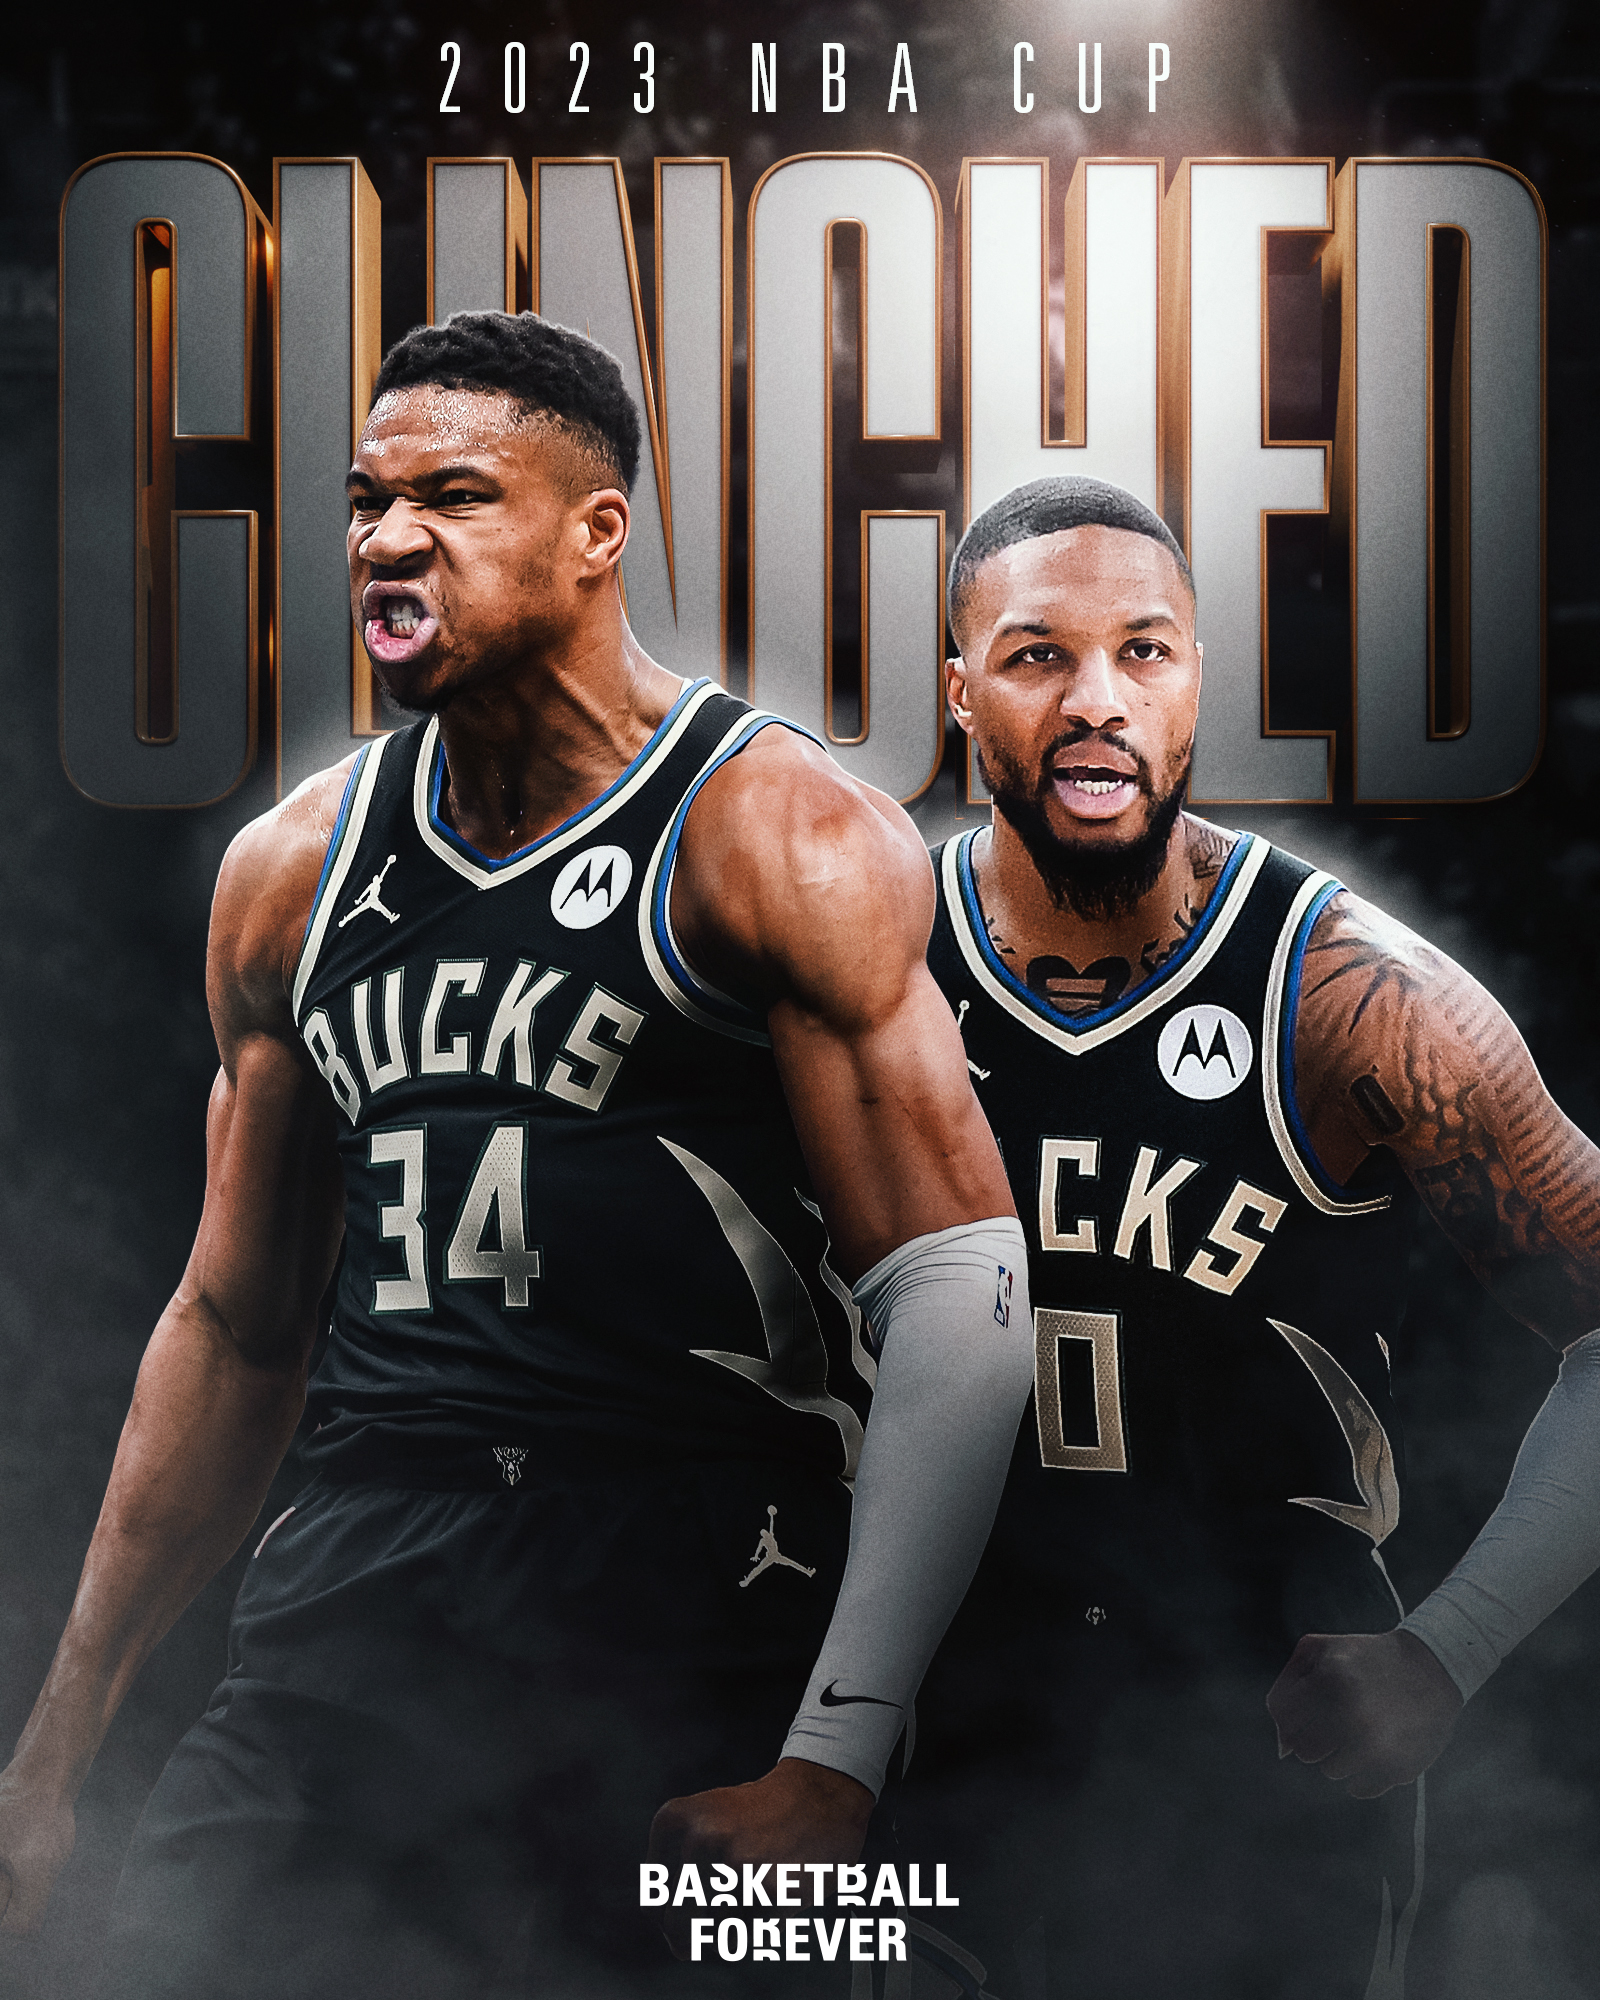 NBA CUP! Giannis with 33 PTS